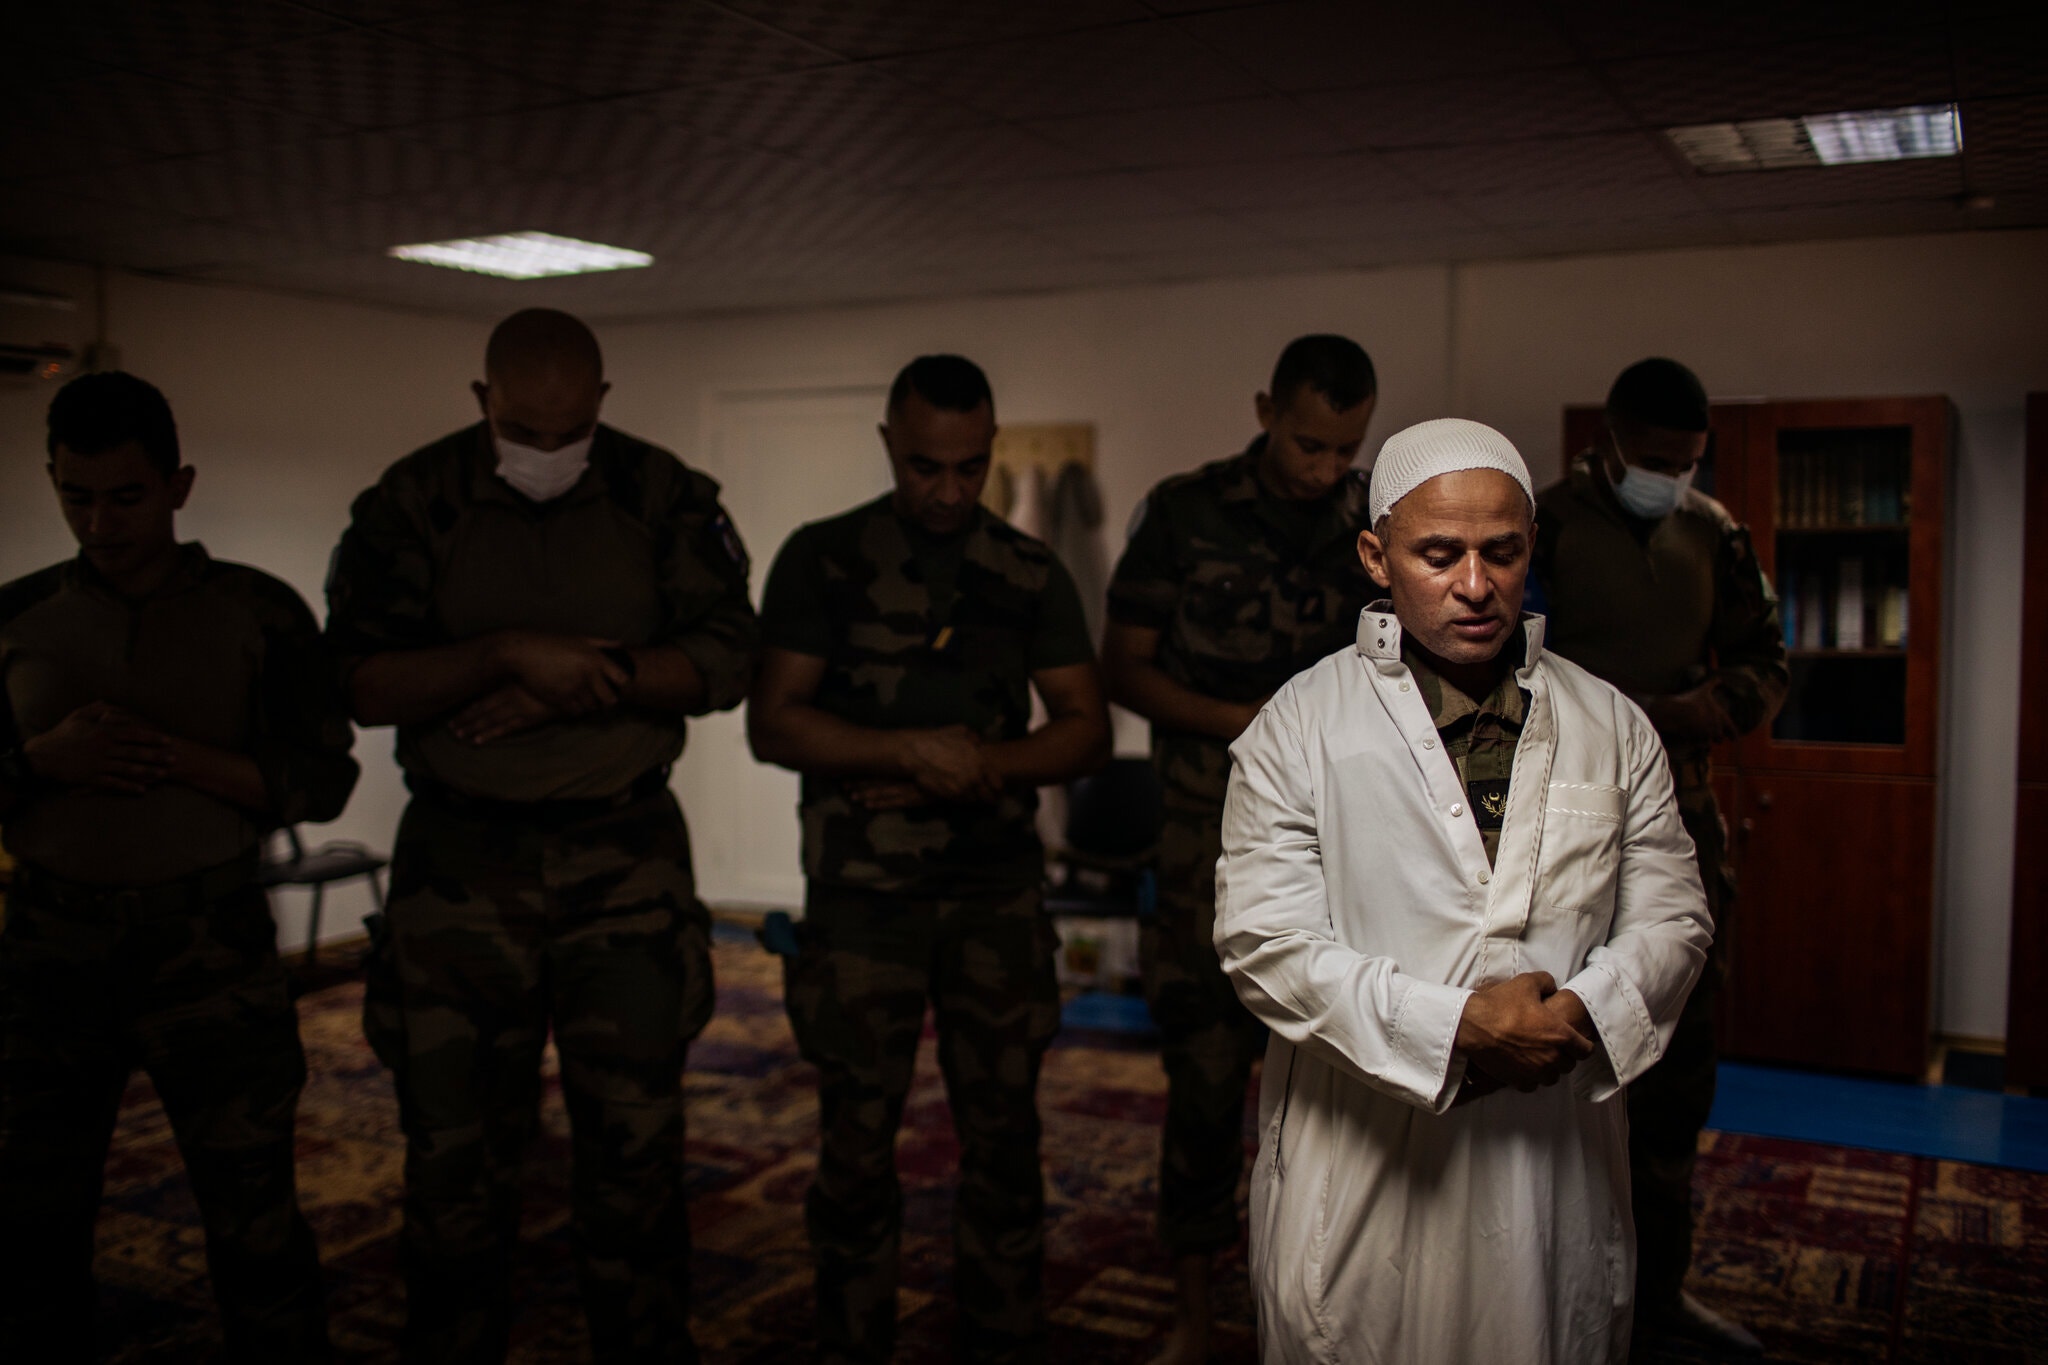 In France’s Military, Muslims Find a Tolerance That Is Elusive Elsewhere